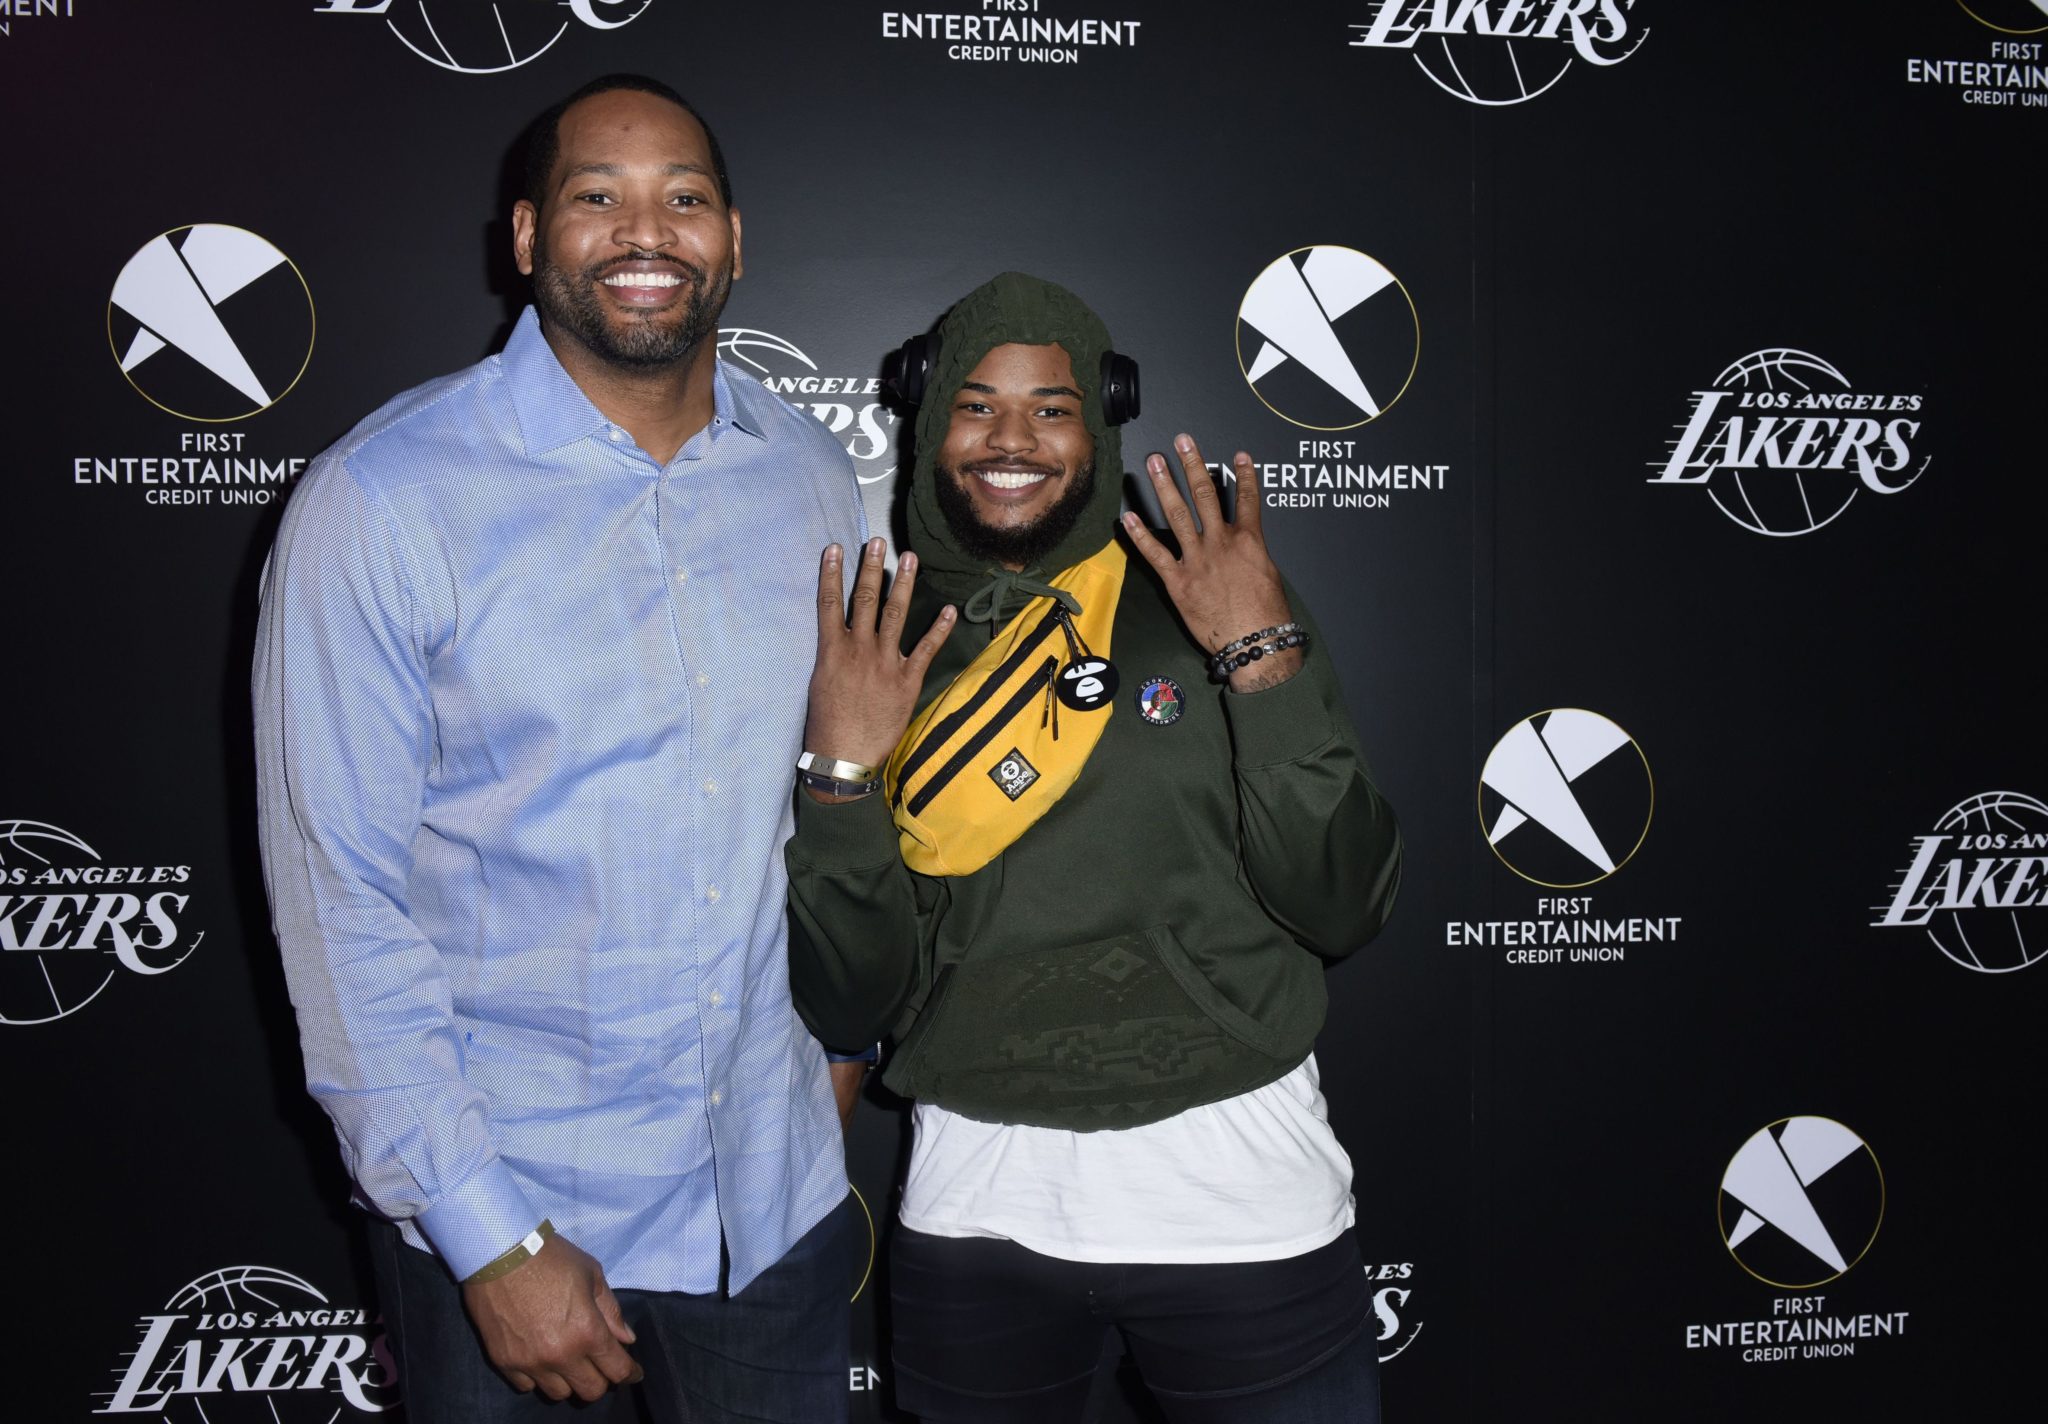 LOS ANGELES, CALIFORNIA - MARCH 4: Lakers legend Robert Horry and Camron Horry attend the First Entertainment x Los Angeles Lakers and Anthony Davis Partnership Launch Event at The Theatre at Ace Hotel on March 4, 2020 in Los Angeles, California.  (Photo by Vivien Killilea/Getty Images for First Entertainment)